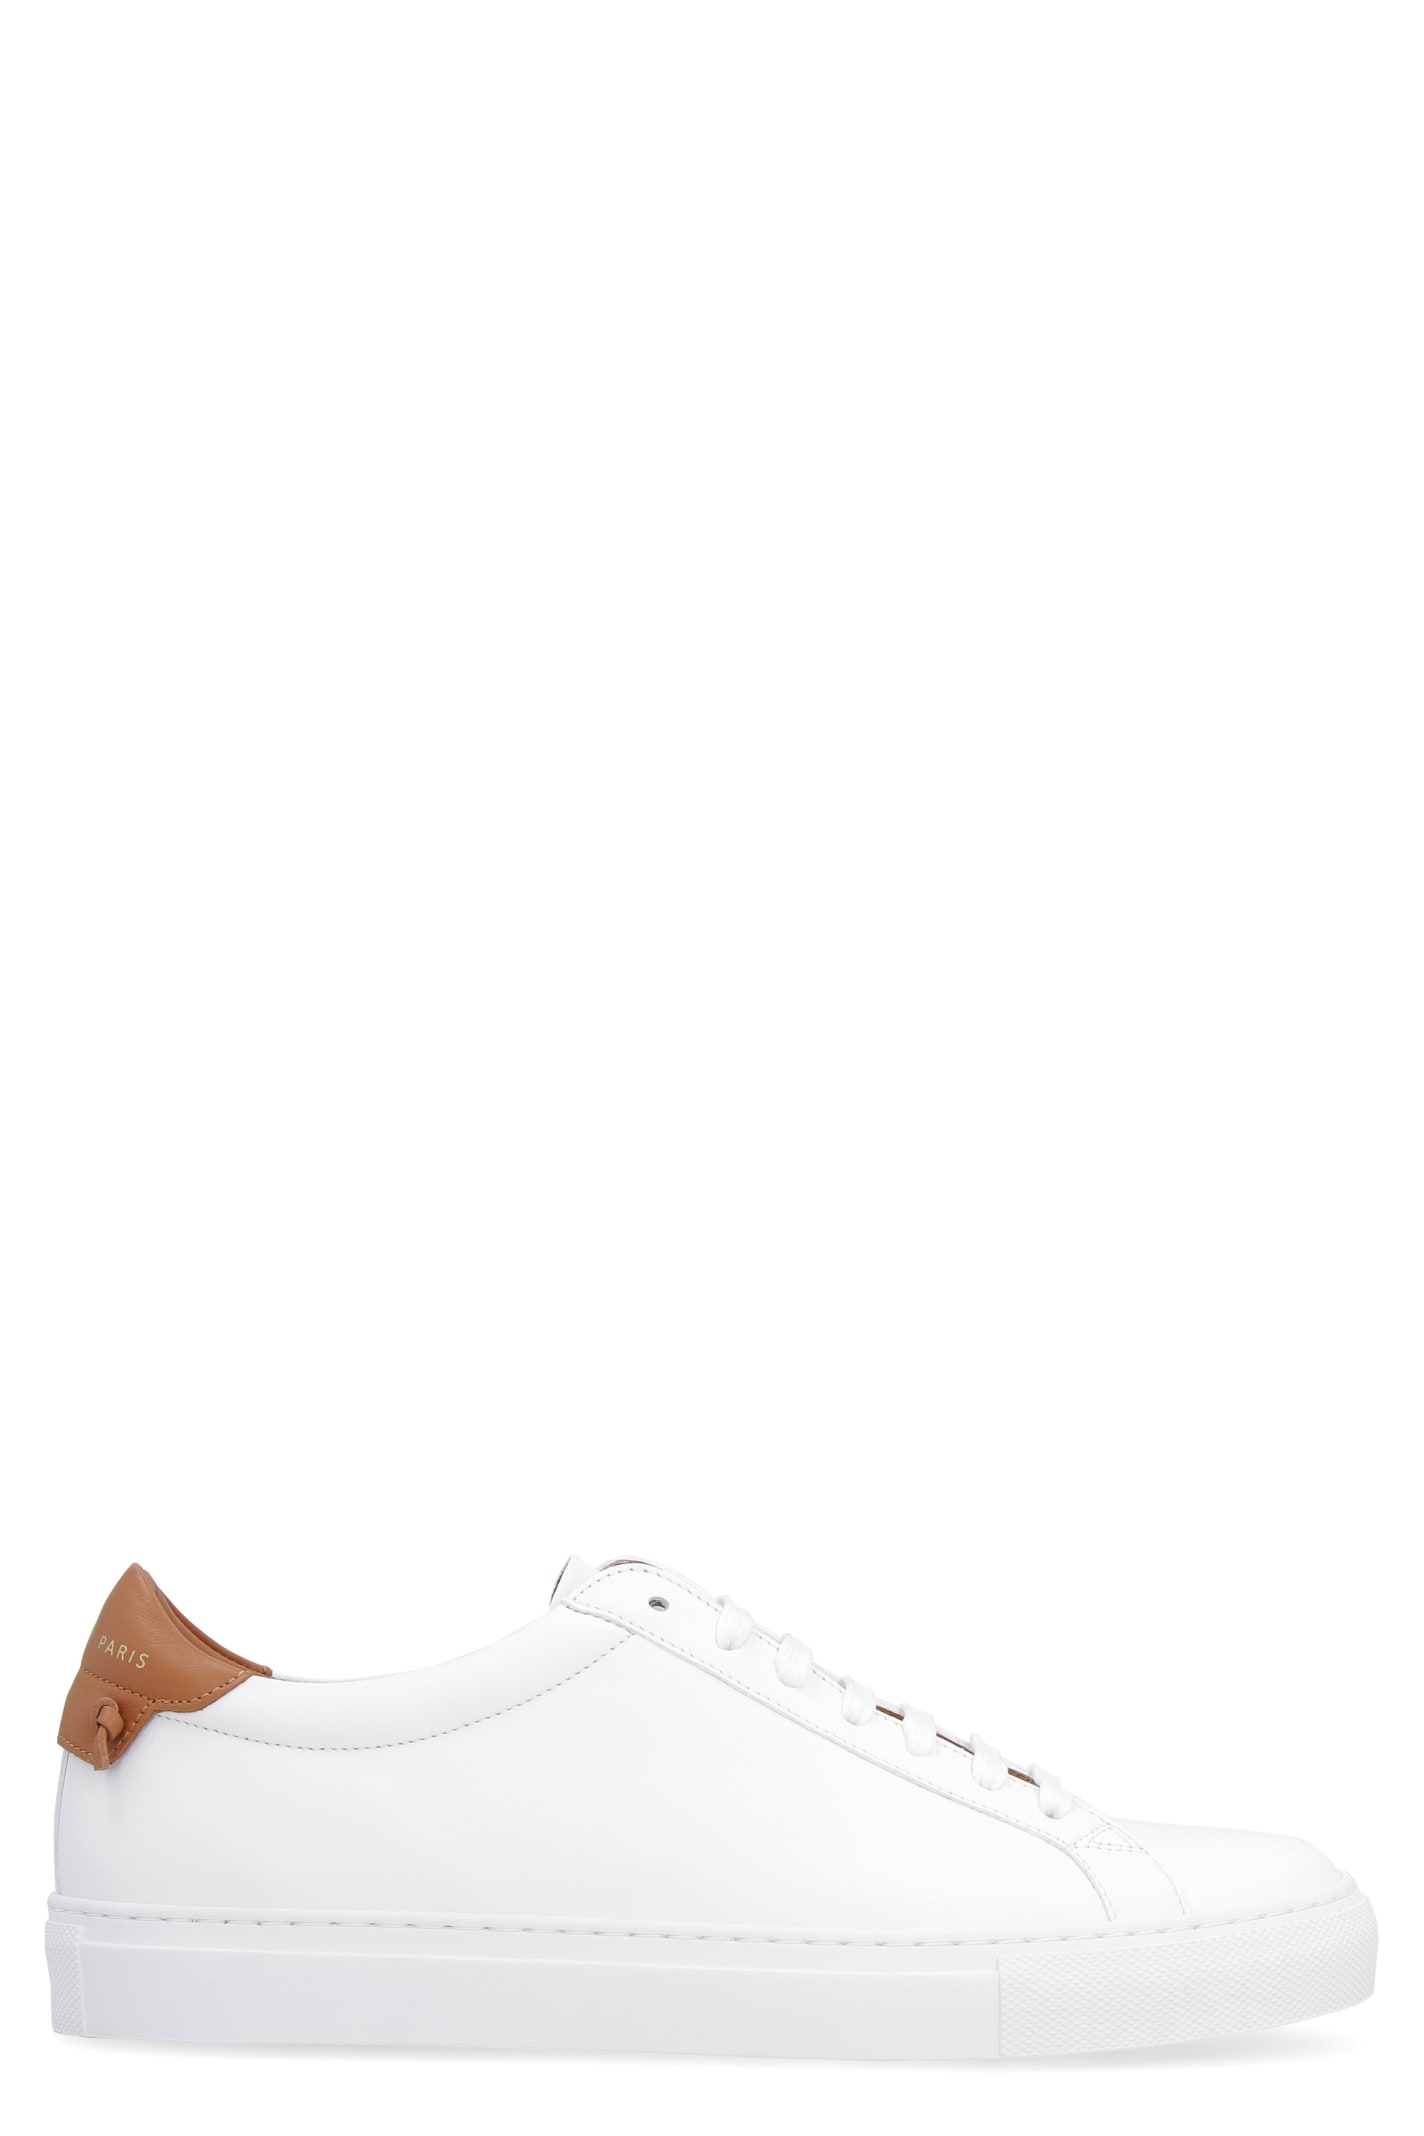 GIVENCHY URBAN STREET LEATHER SNEAKERS,11247002